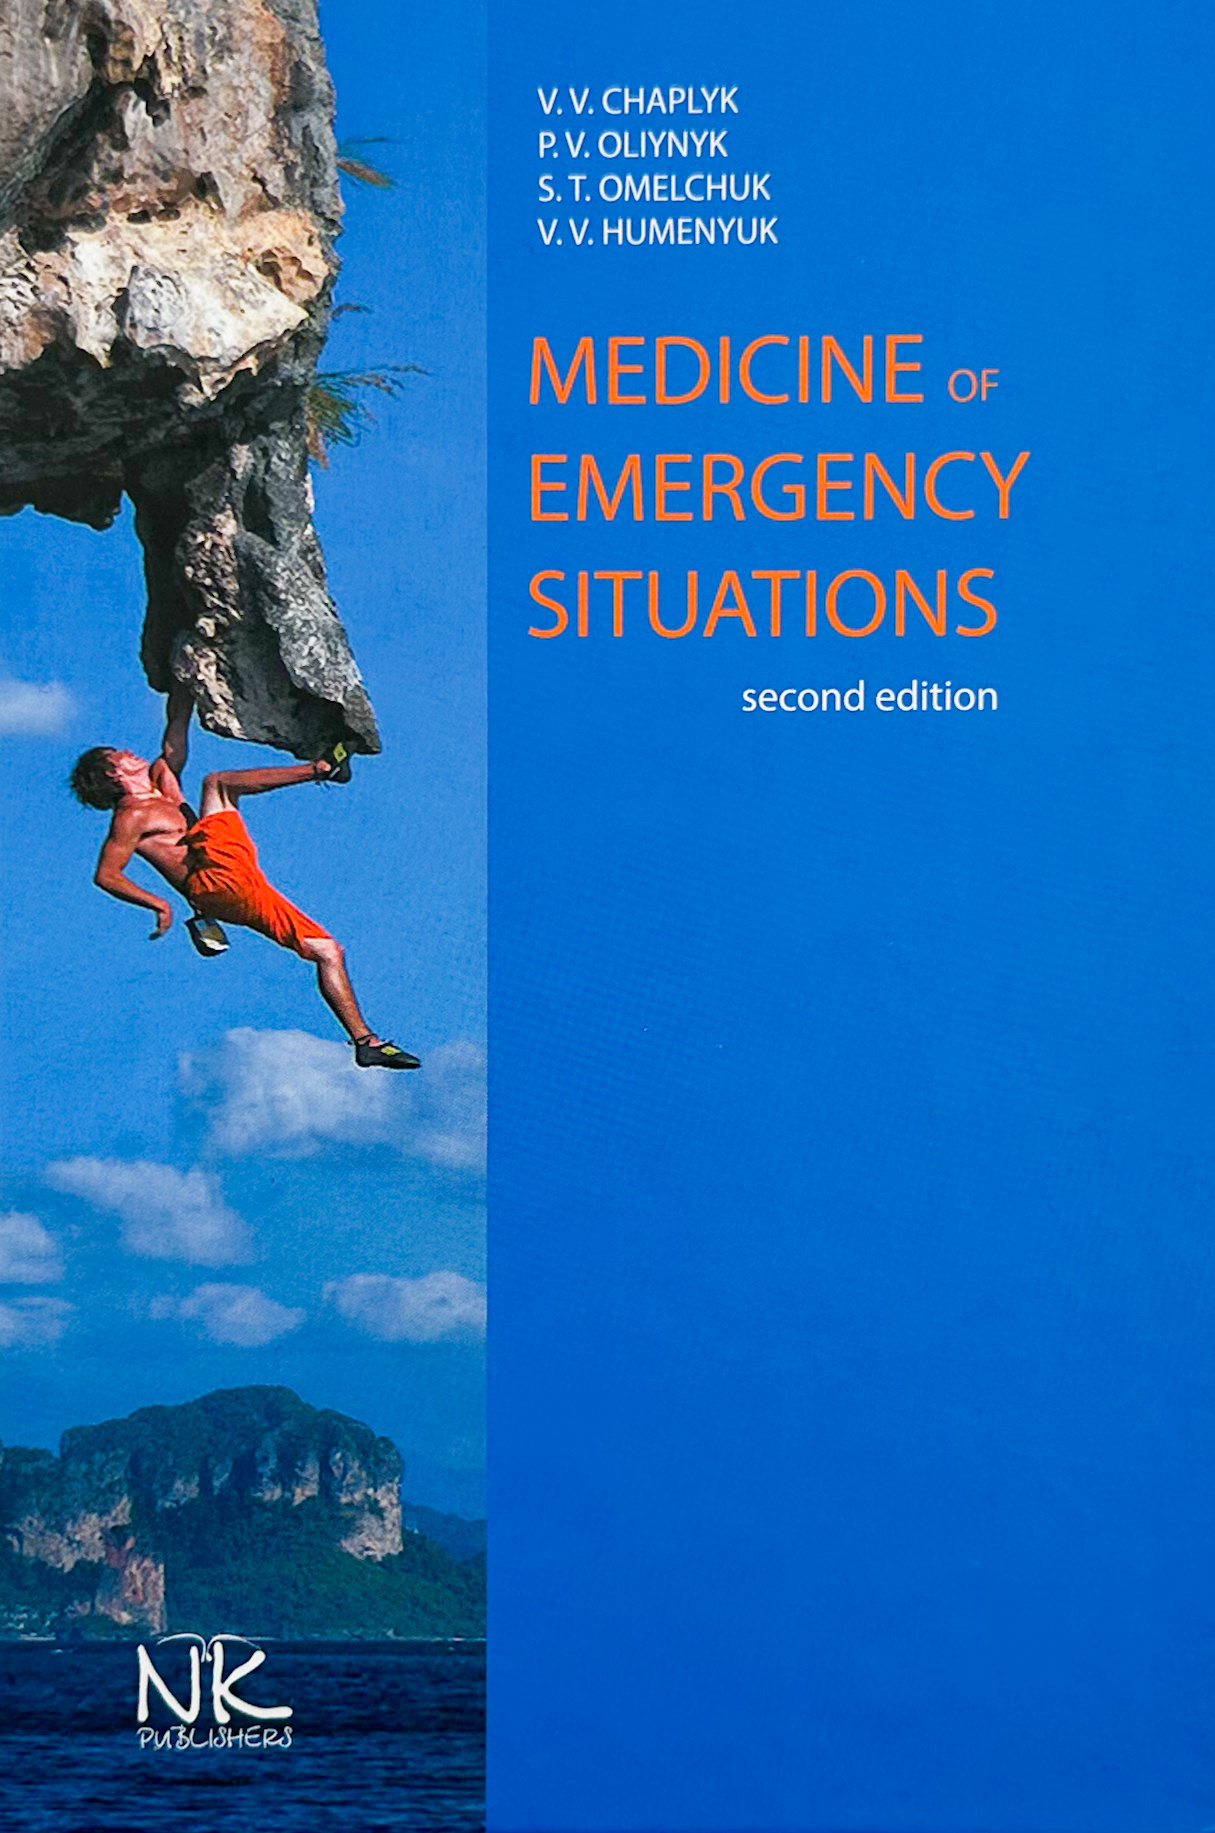 Medicine of Emergency Situations